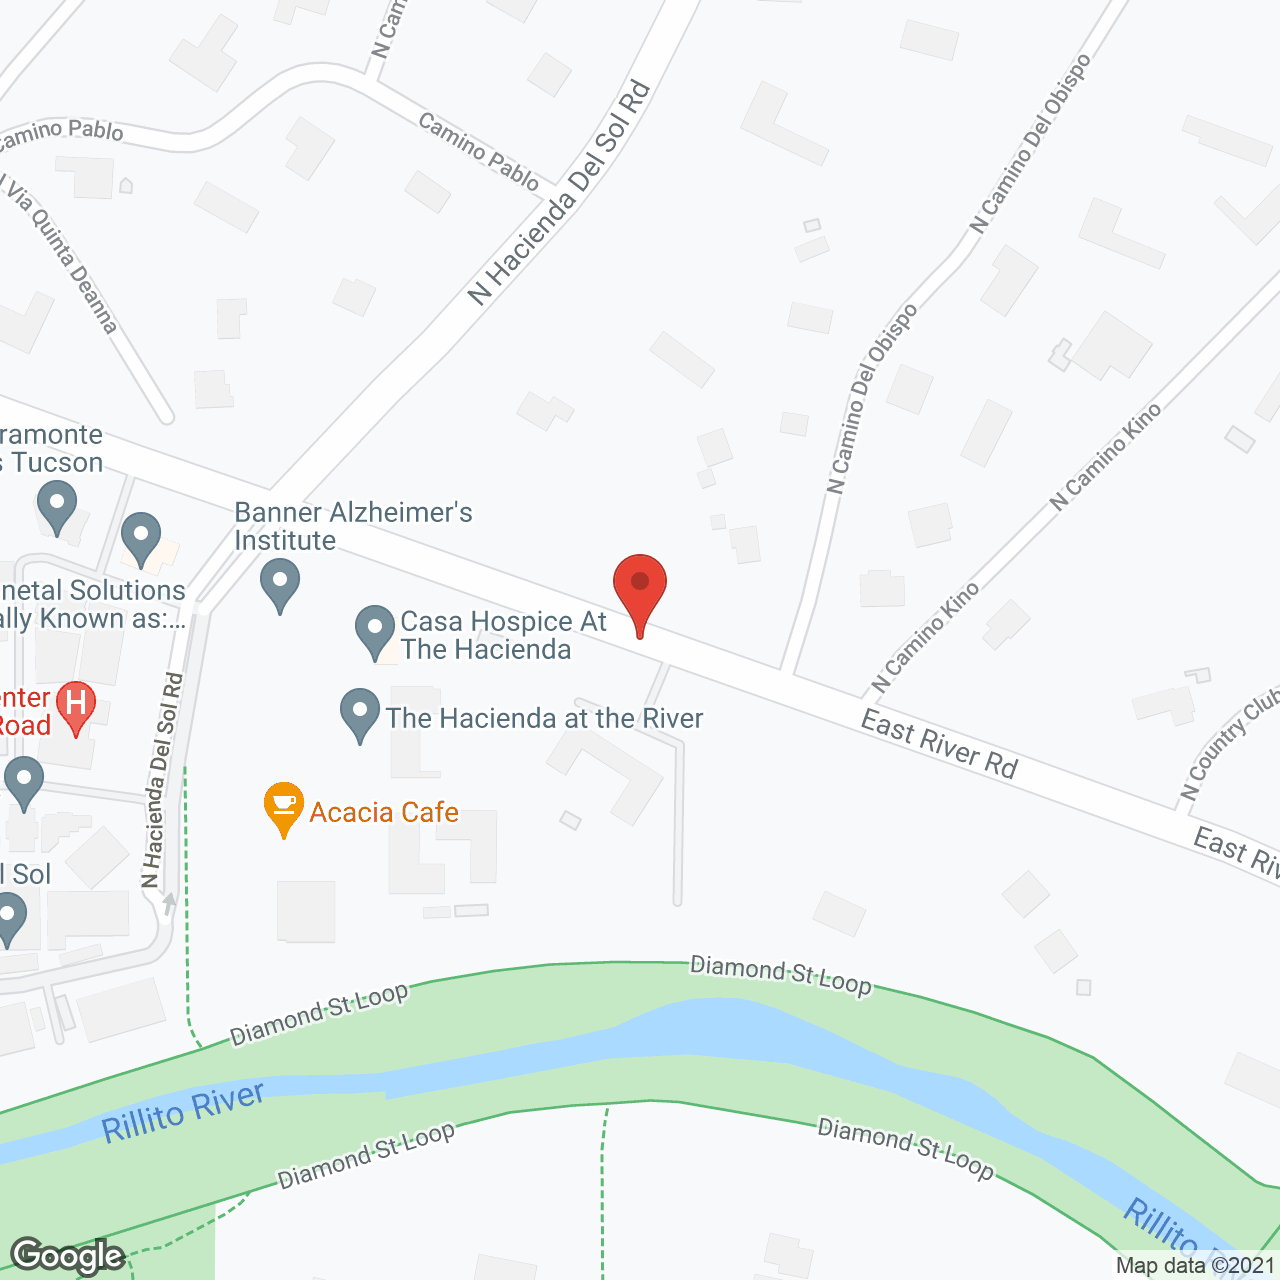 The Hacienda at the River in google map